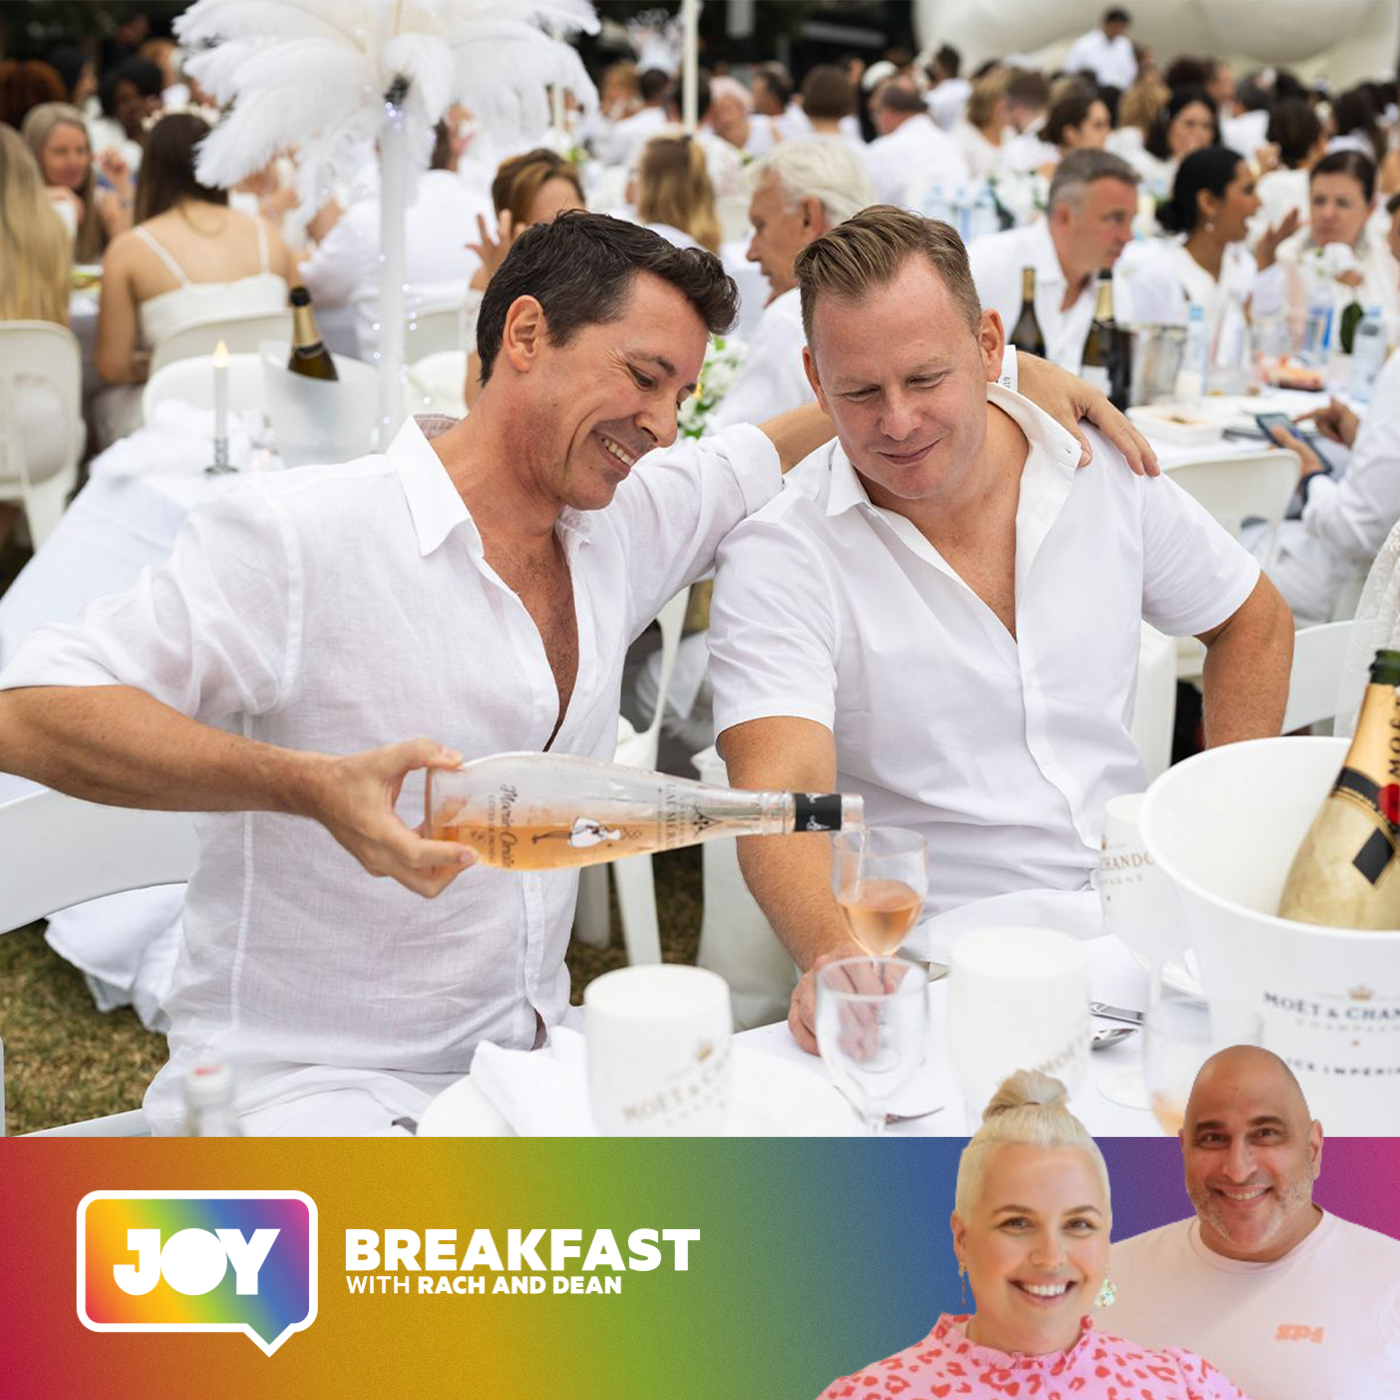 Le Diner en Blanc brings a touch of France to Melbourne